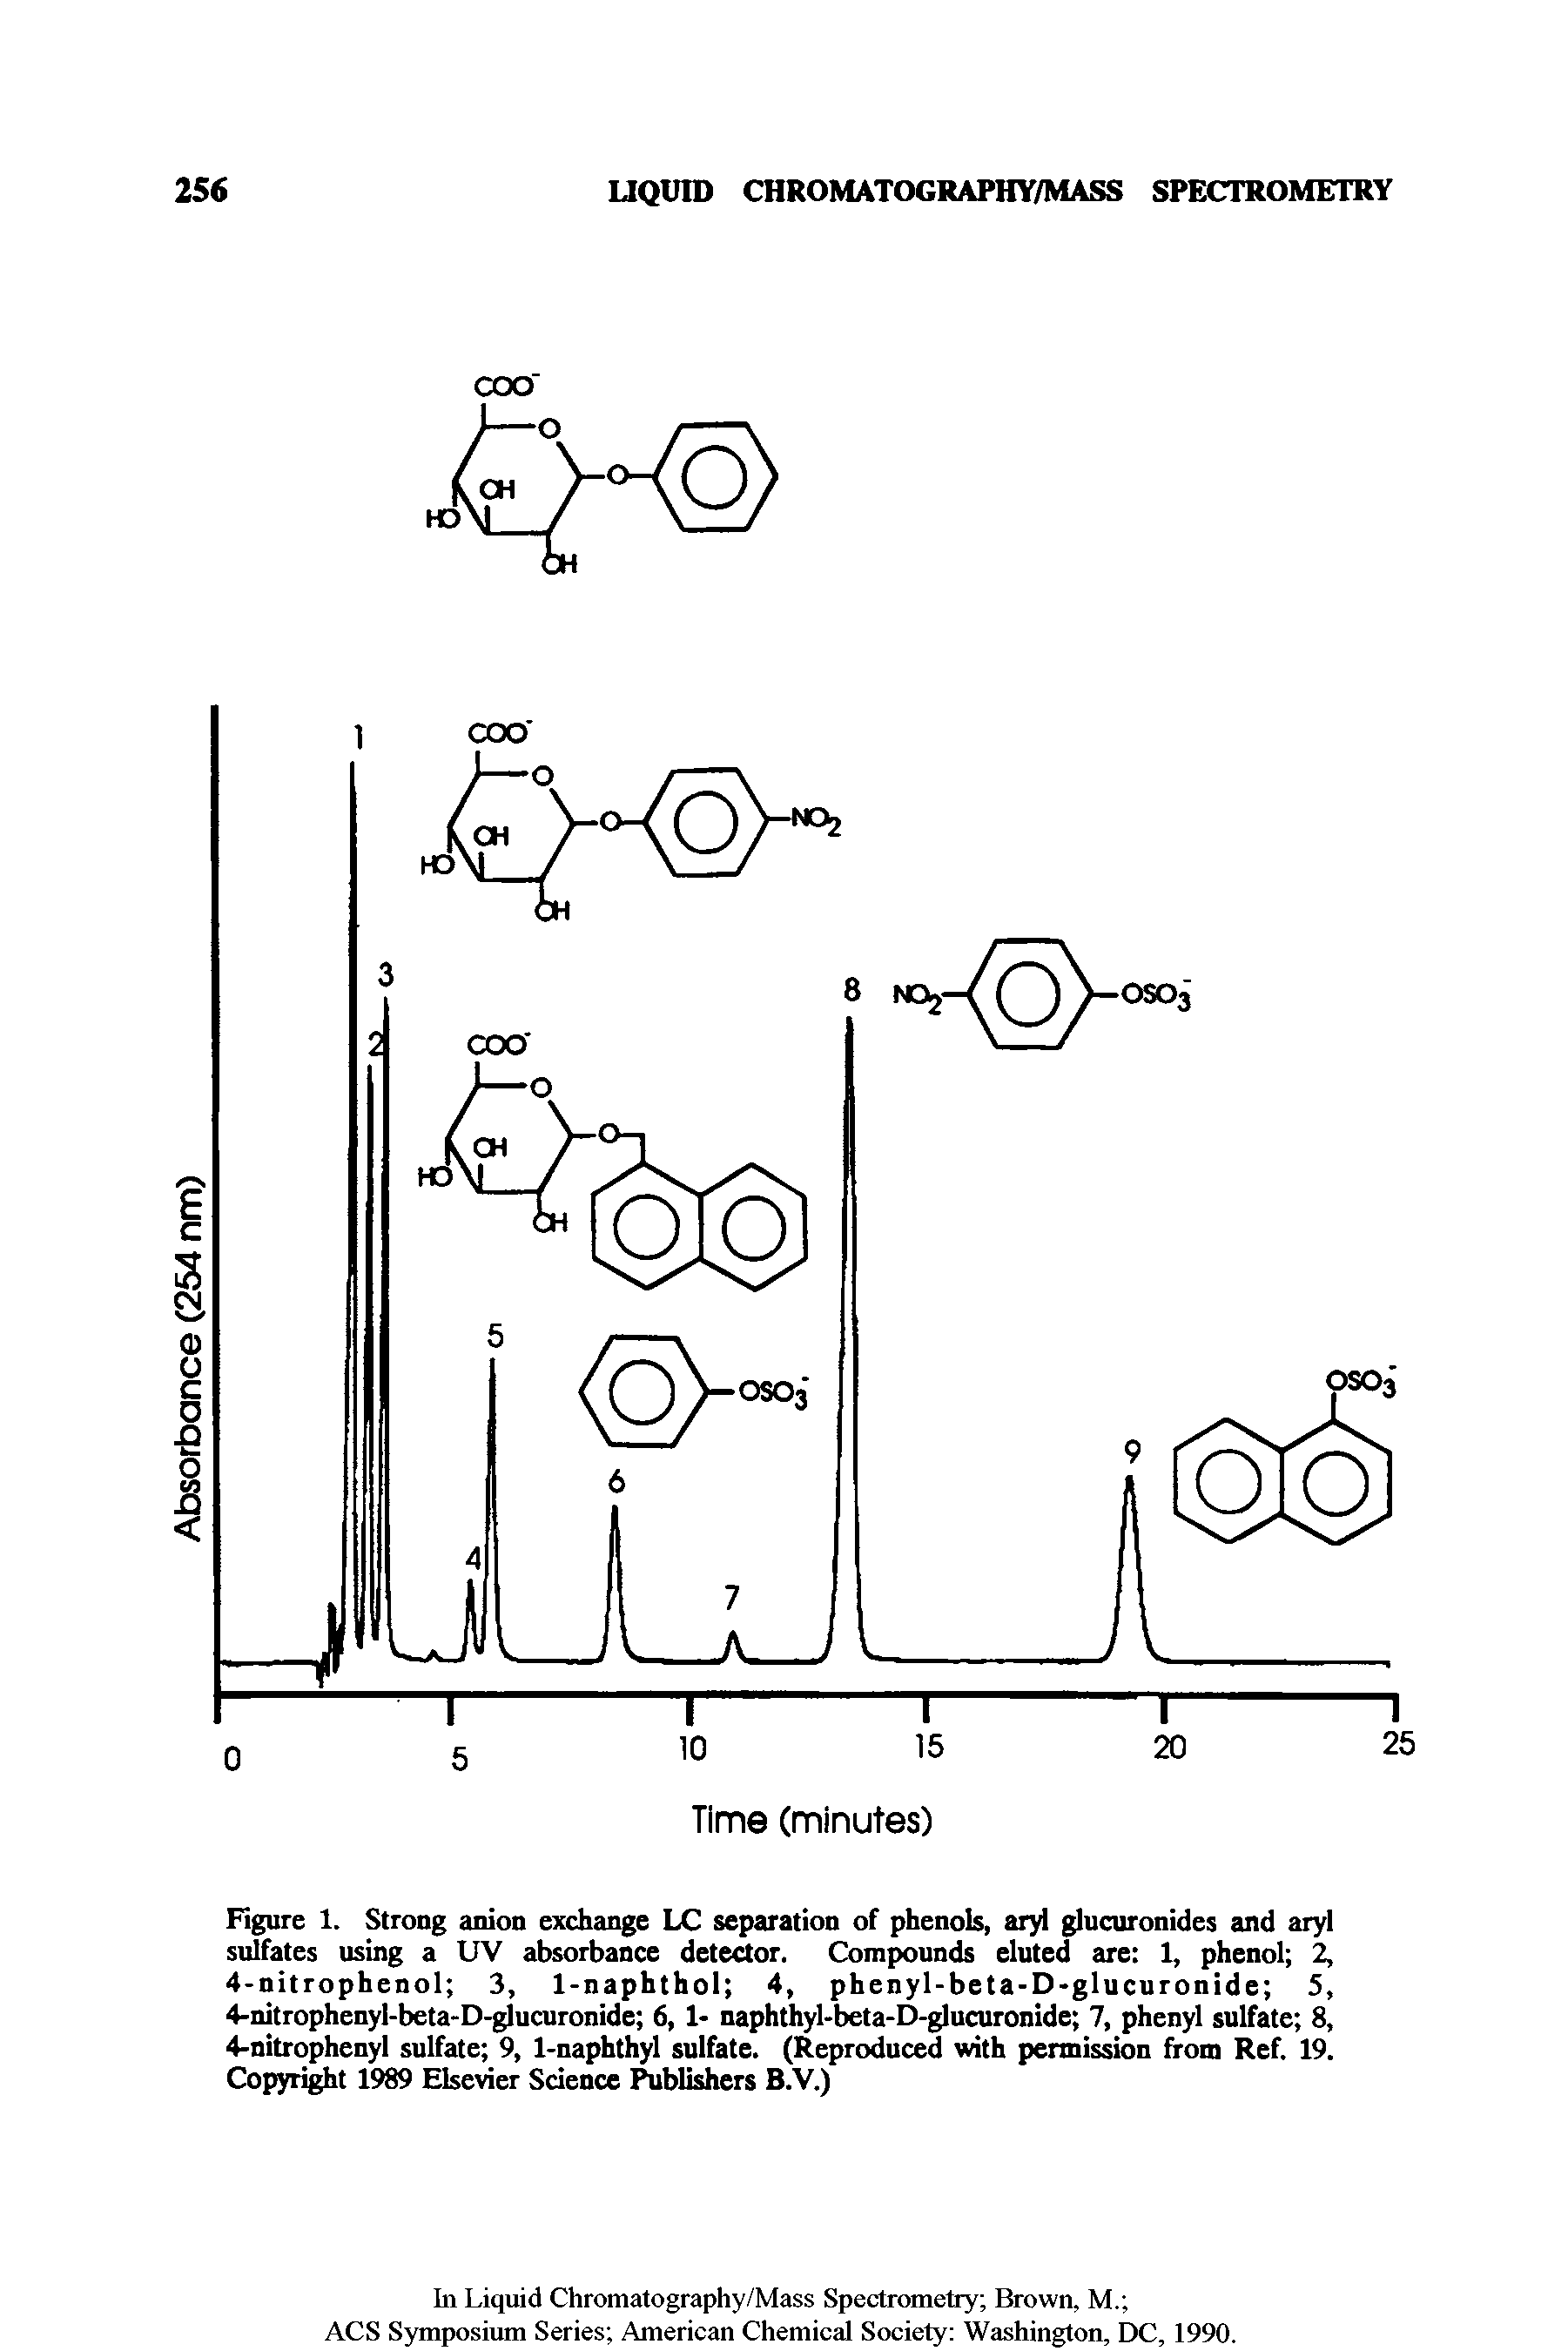 Figure 1. Strong anion exchange LC separation of phenols, aryl glucuronides and aryl sulfates using a UV absorbance detector. Compounds eluted are 1, phenol 2, 4-nitrophenol 3, 1-naphthol 4, phenyl-be ta-D-glucuronide 5, 4-nitrophenyl-beta-D-glucuronide 6, 1- naphthyl-beta-D-glucuronide 7, phenyl sulfate 8, 4-nitrophenyl sulfate 9, 1-naphthyl sulfate. (Reproduced with permission from Ref. 19. Copyright 1989 Elsevier Science Publishers B.V.)...